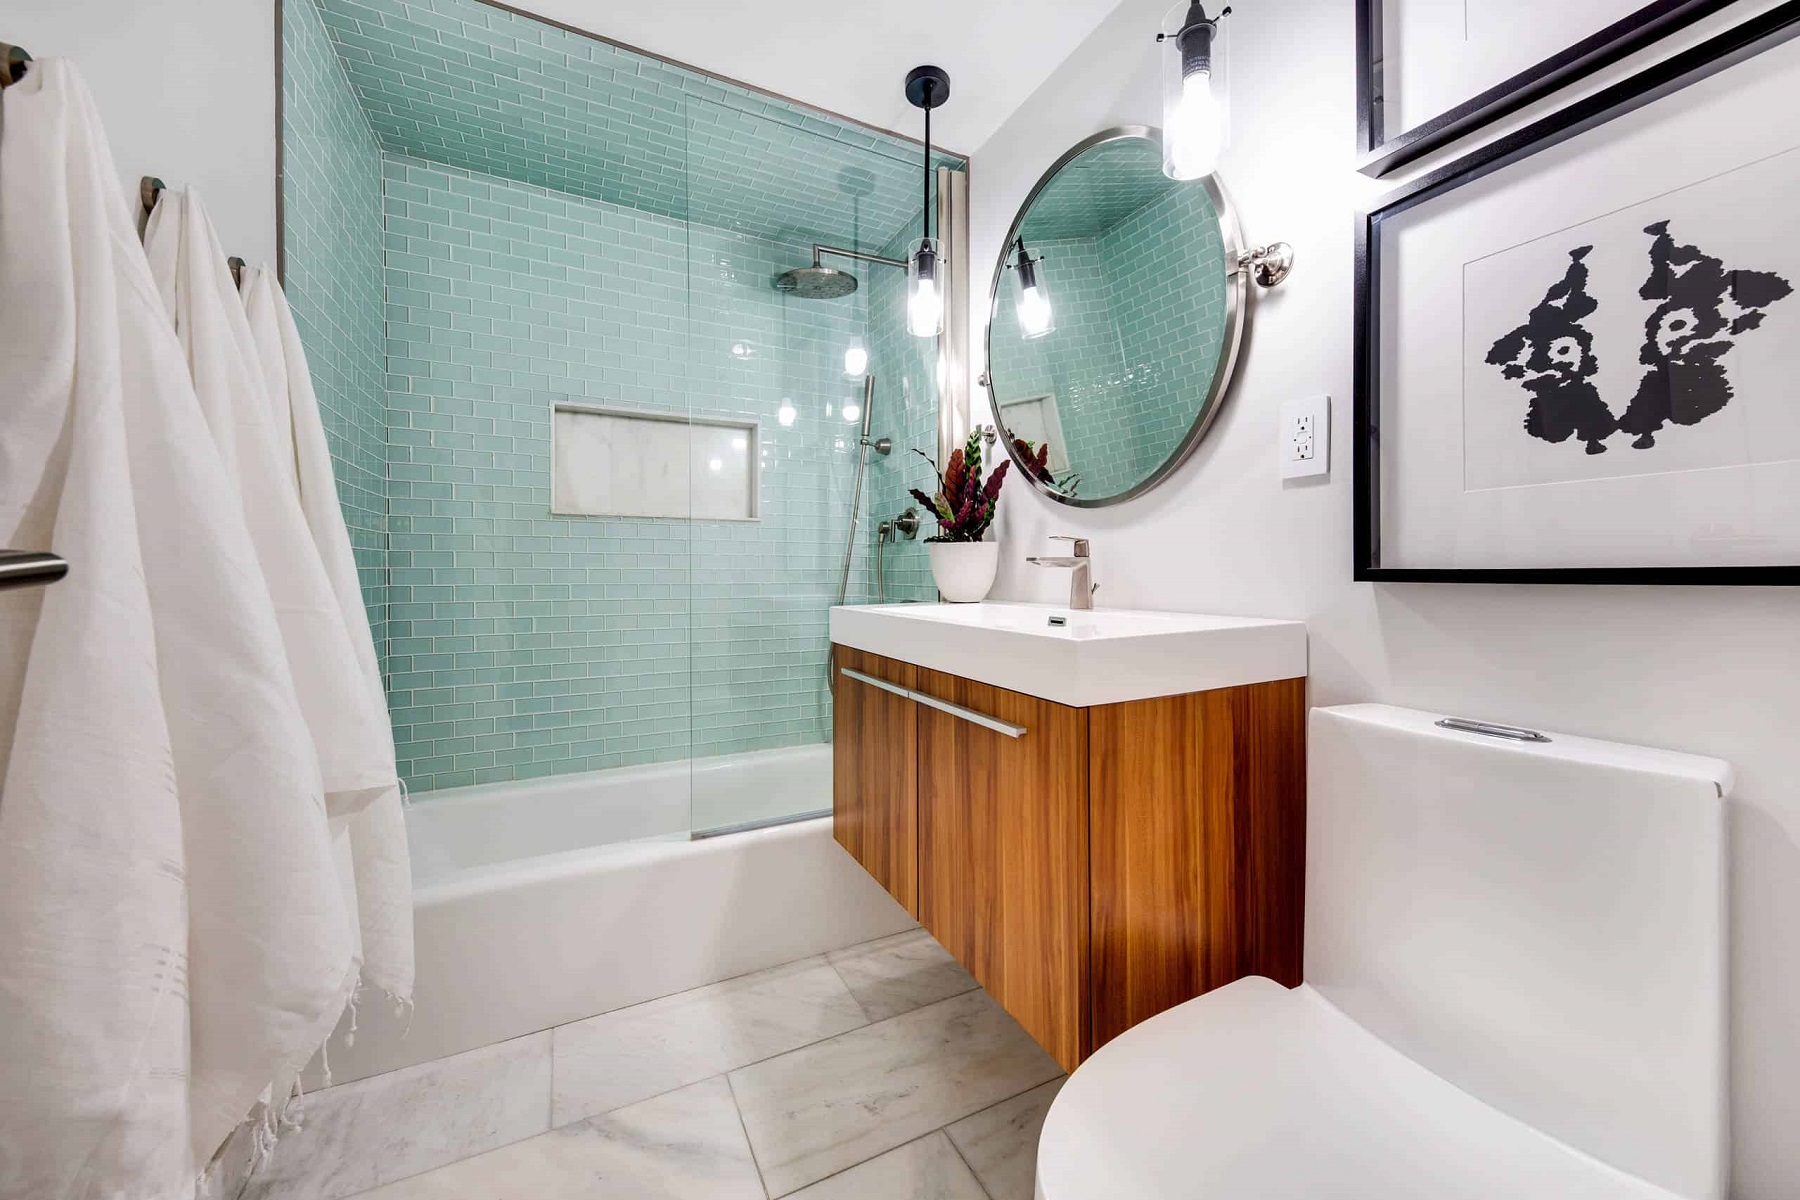 How To Plan A Small Bathroom Remodel 2021 Guidelines